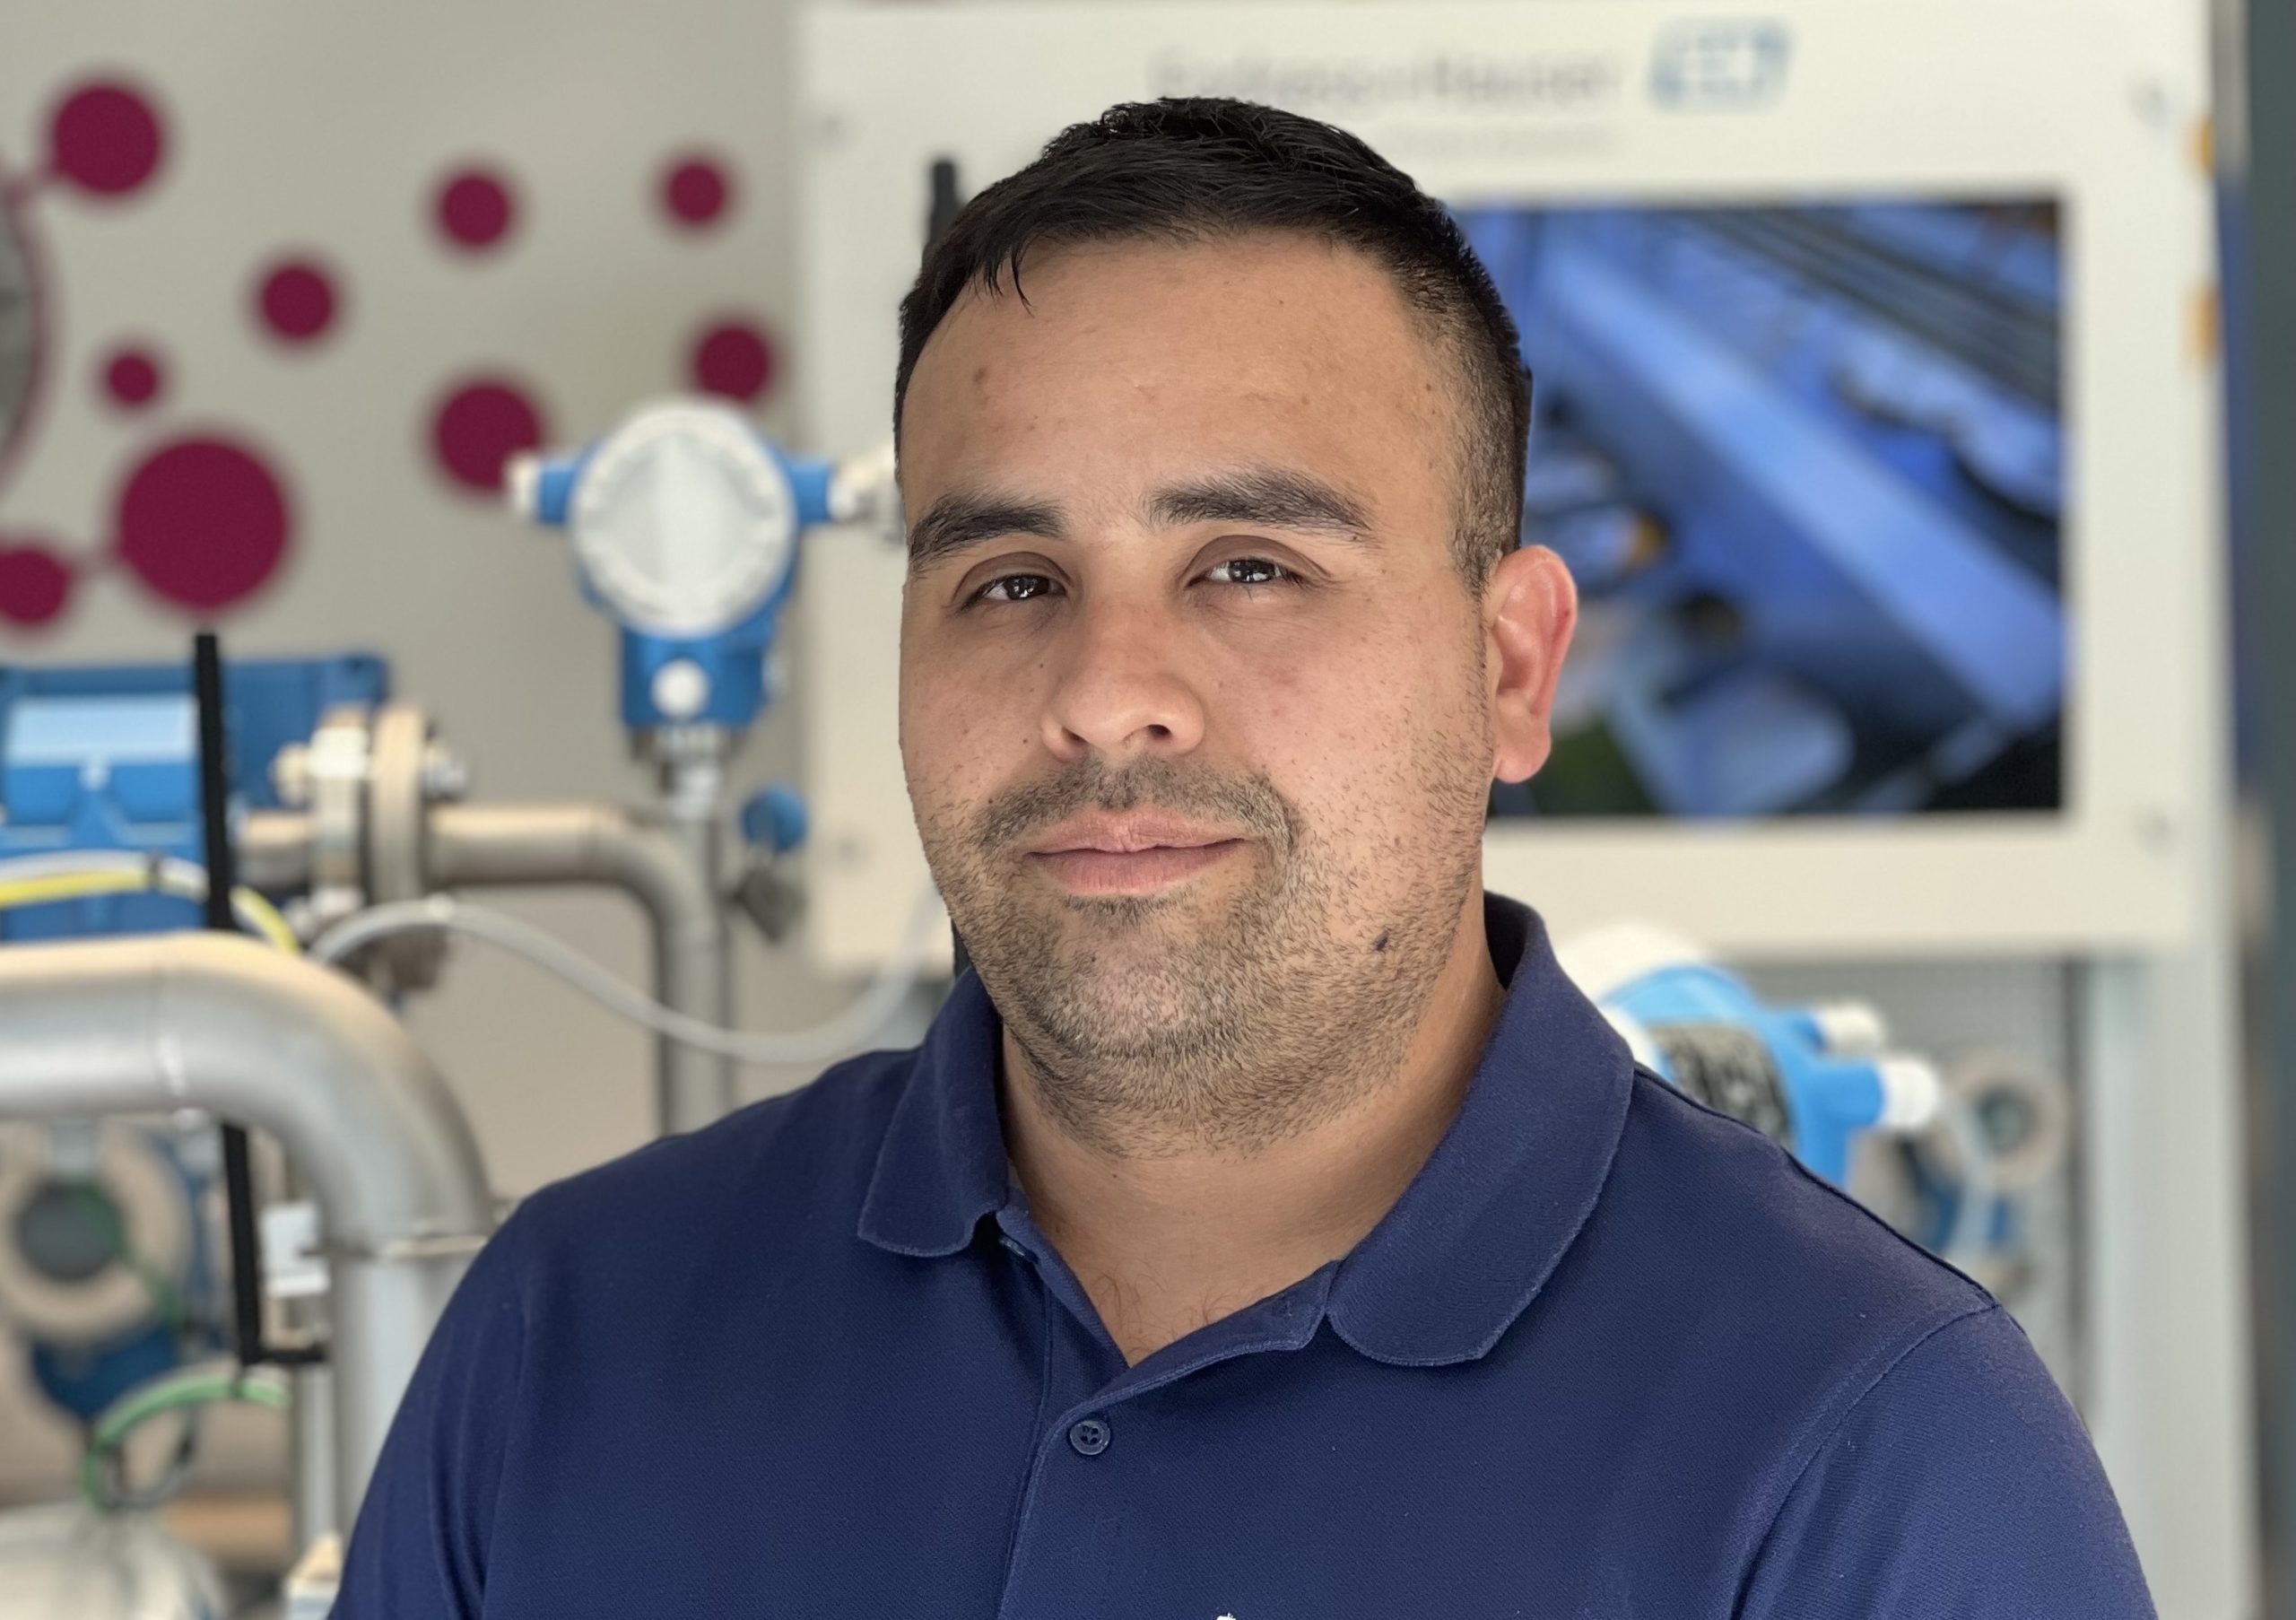 Proveedor Global Endress+Hauser Chile nombra nuevo Product Manager